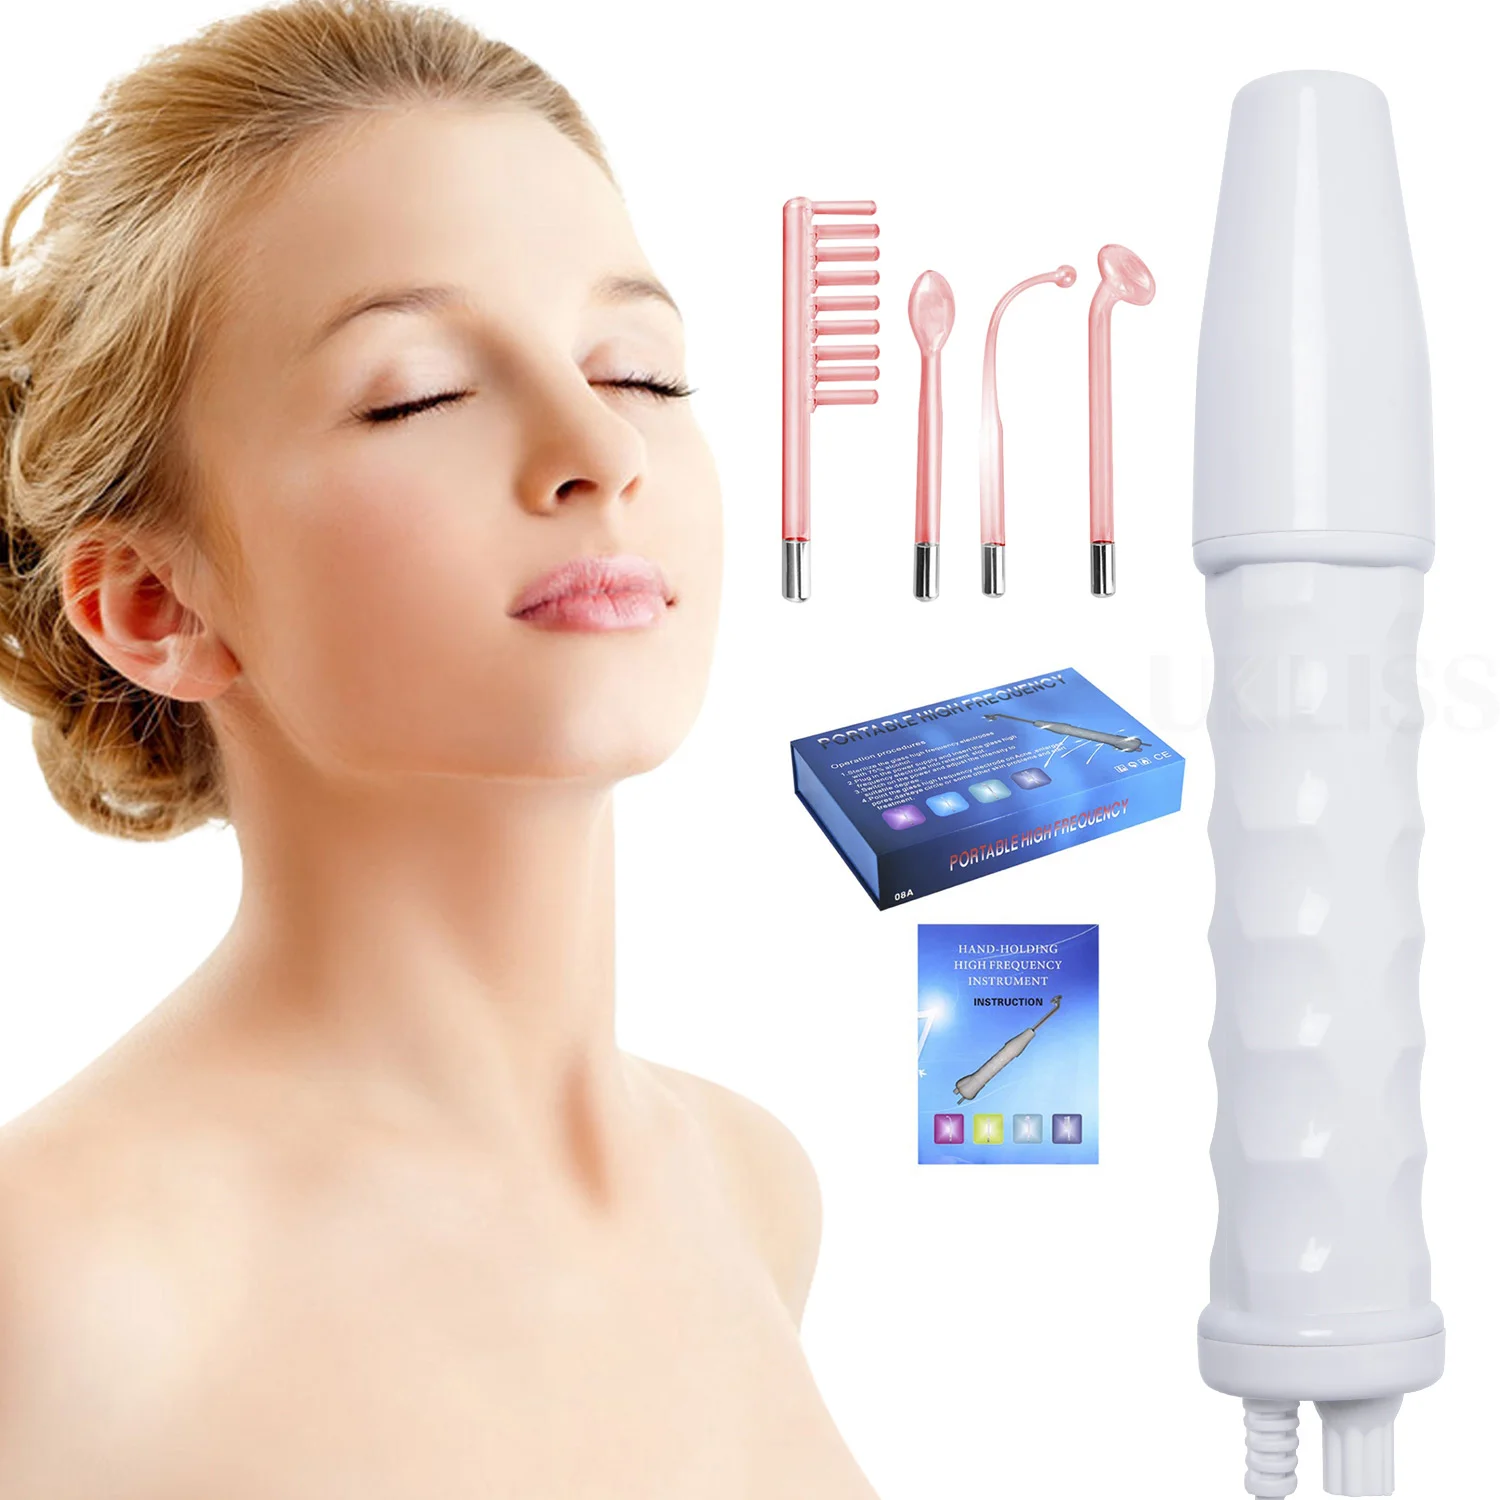 

IFINE Beauty Home Use 4 In 1 Portable High Frequency Device LED Glass Tube Acne Spot Remover Skin Therapy Wand Machine, White, purple/orange lights